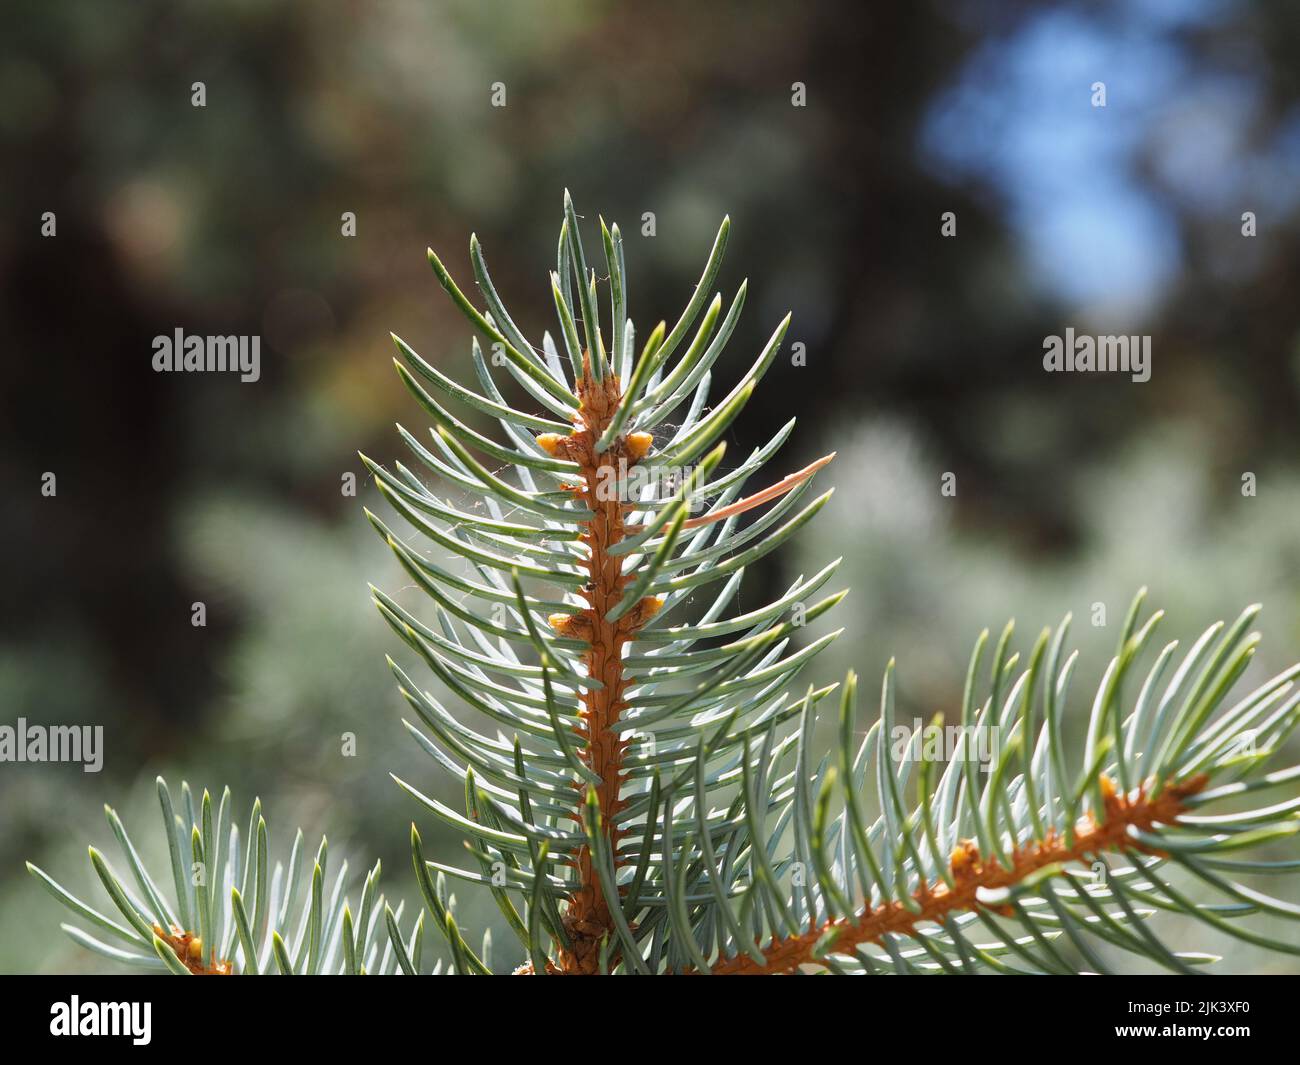 Closeup of fresh young needles growing on a spruce (Picea pungens) in a garden in Ottawa, Ontario, Canada. Stock Photo